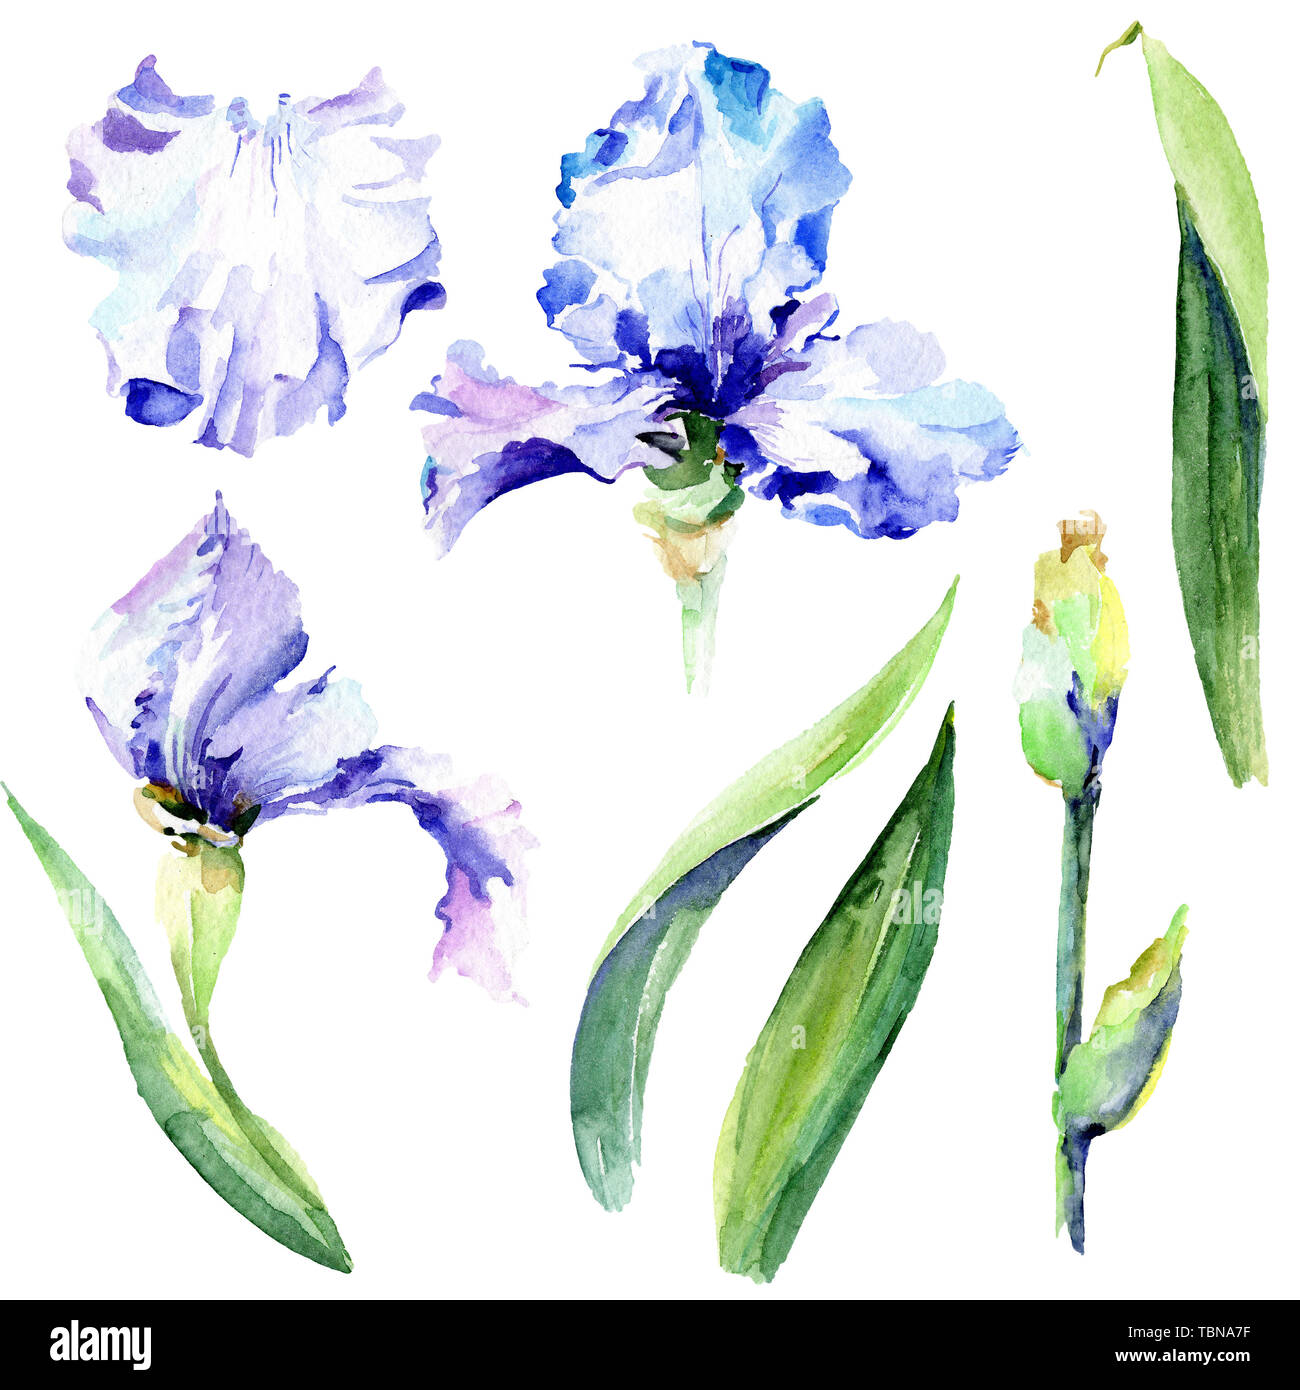 Violet Iris Floral Botanical Flowers Wild Spring Leaf Wildflower Isolated Watercolor Background Illustration Set Watercolour Drawing Fashion Aquare Stock Photo Alamy